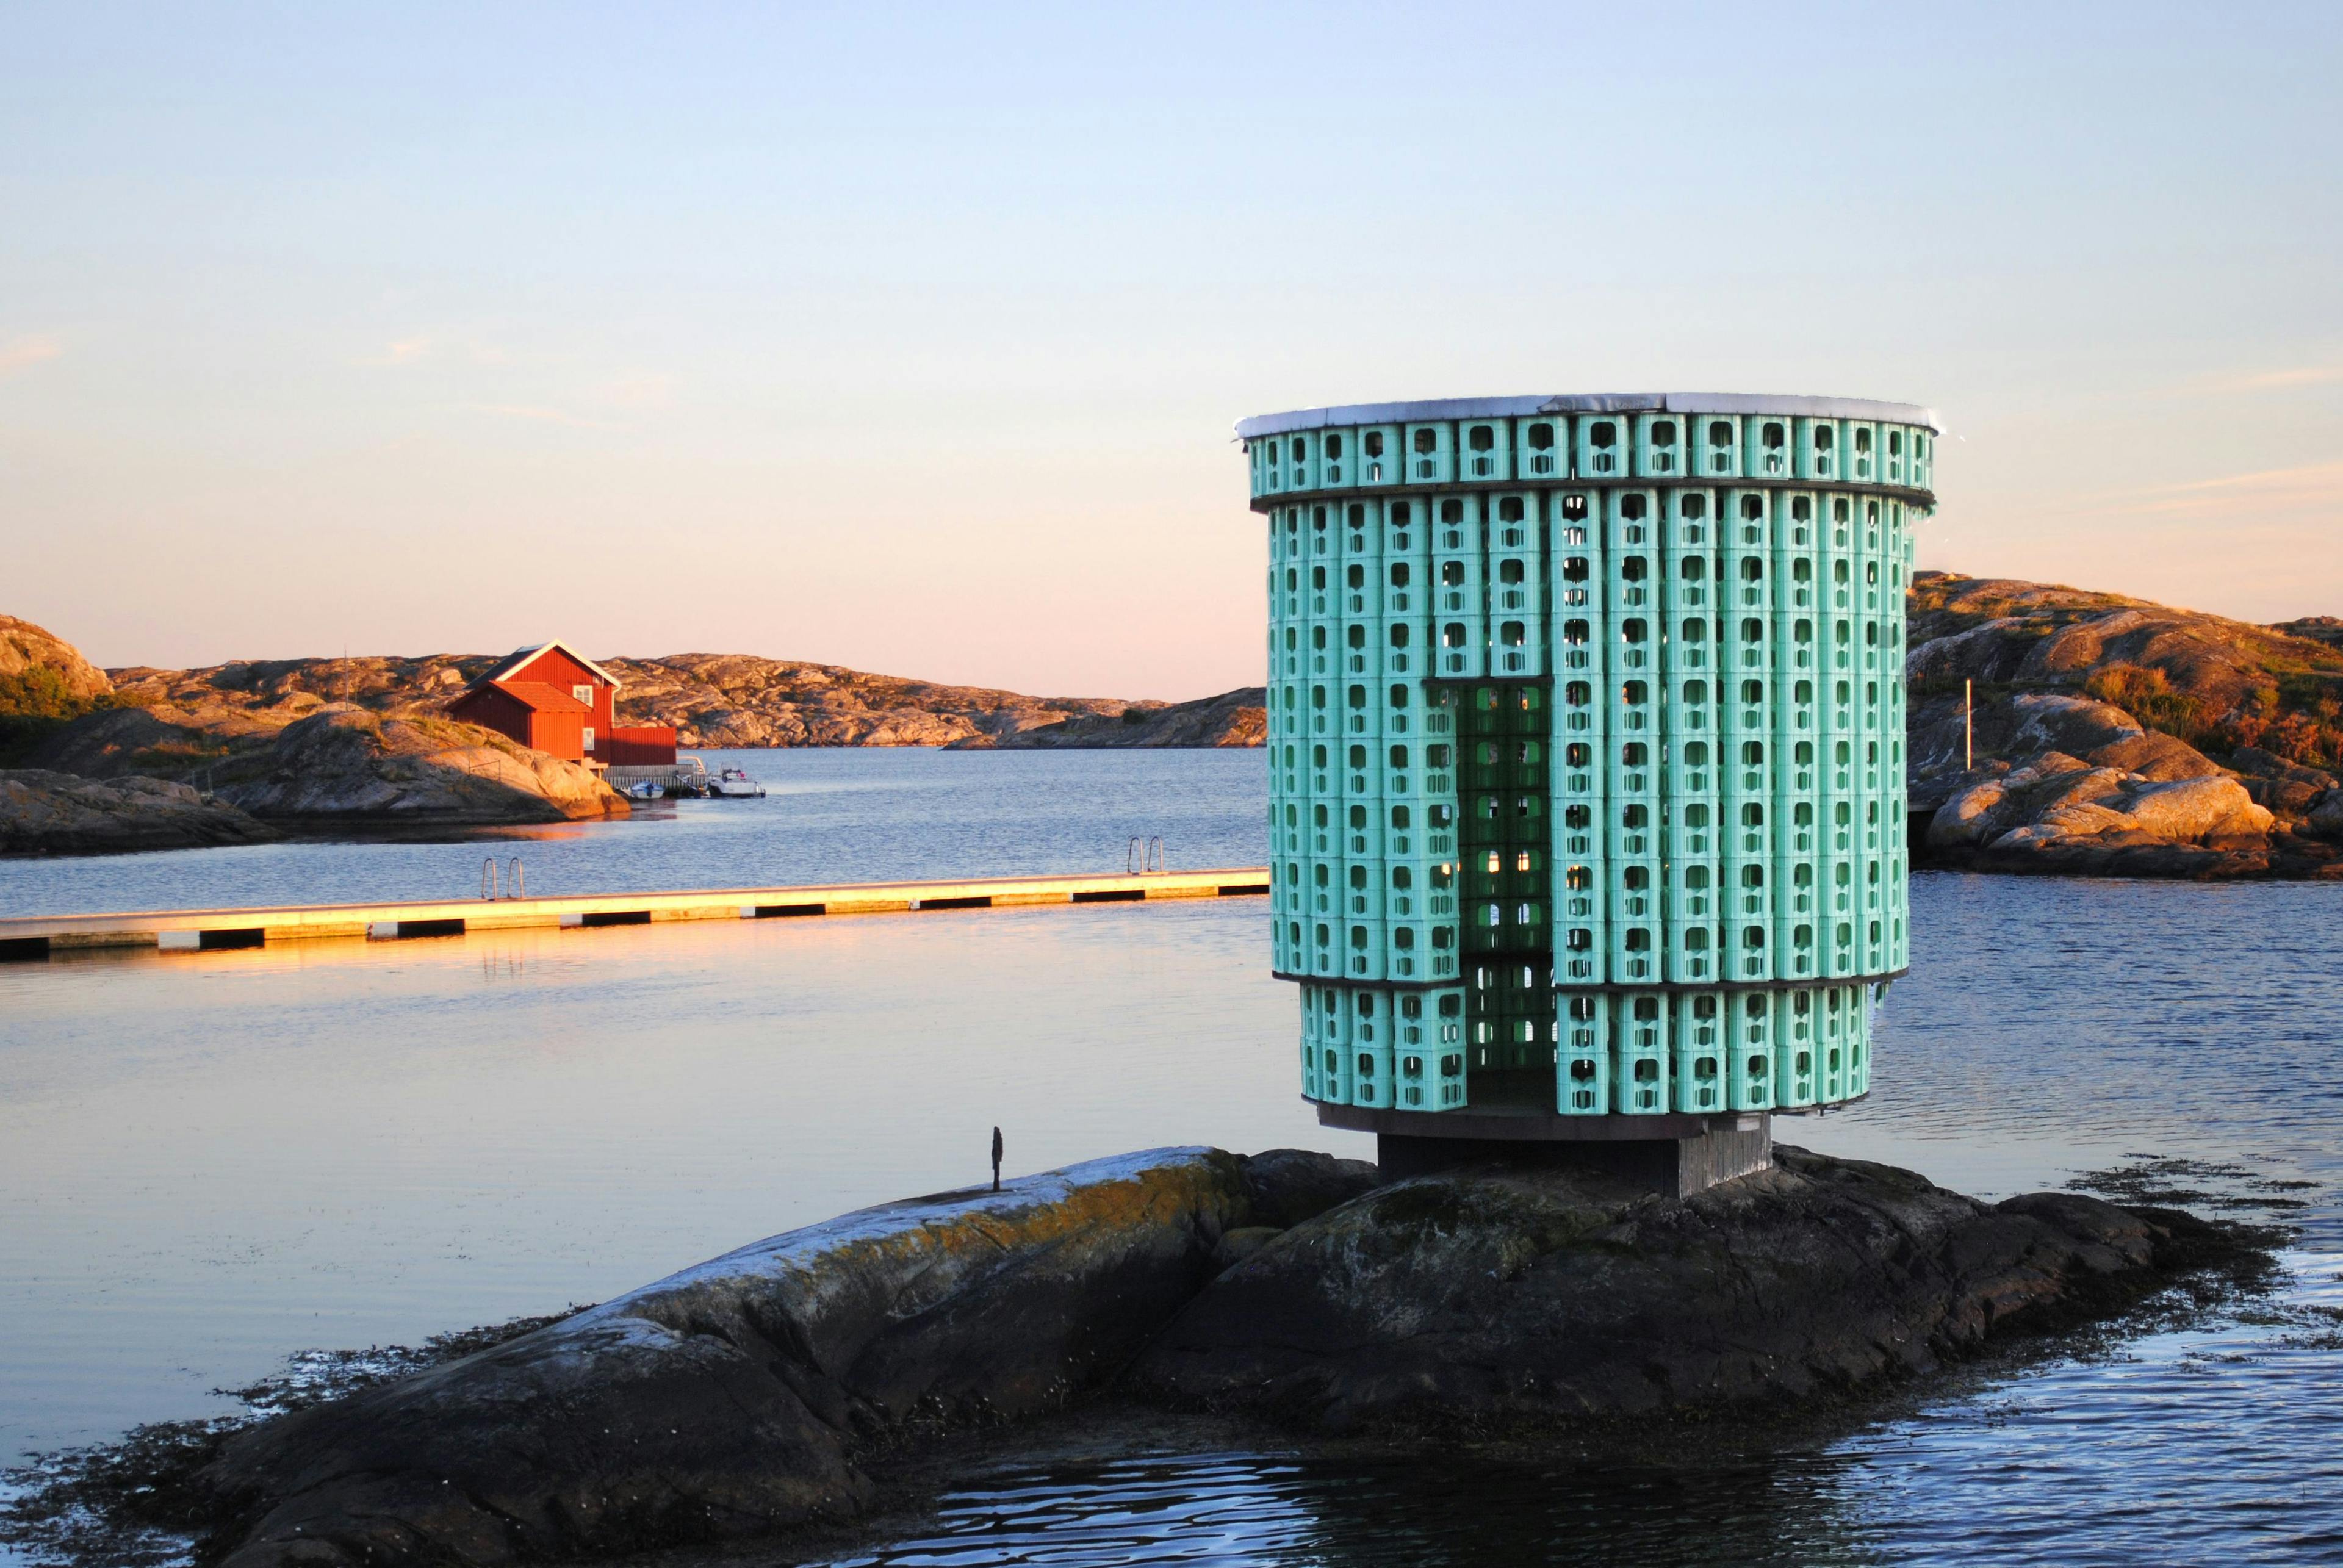 The sculpture Lighthouse by the artist duo Berthold Hörbelt & Wolfgang Winter